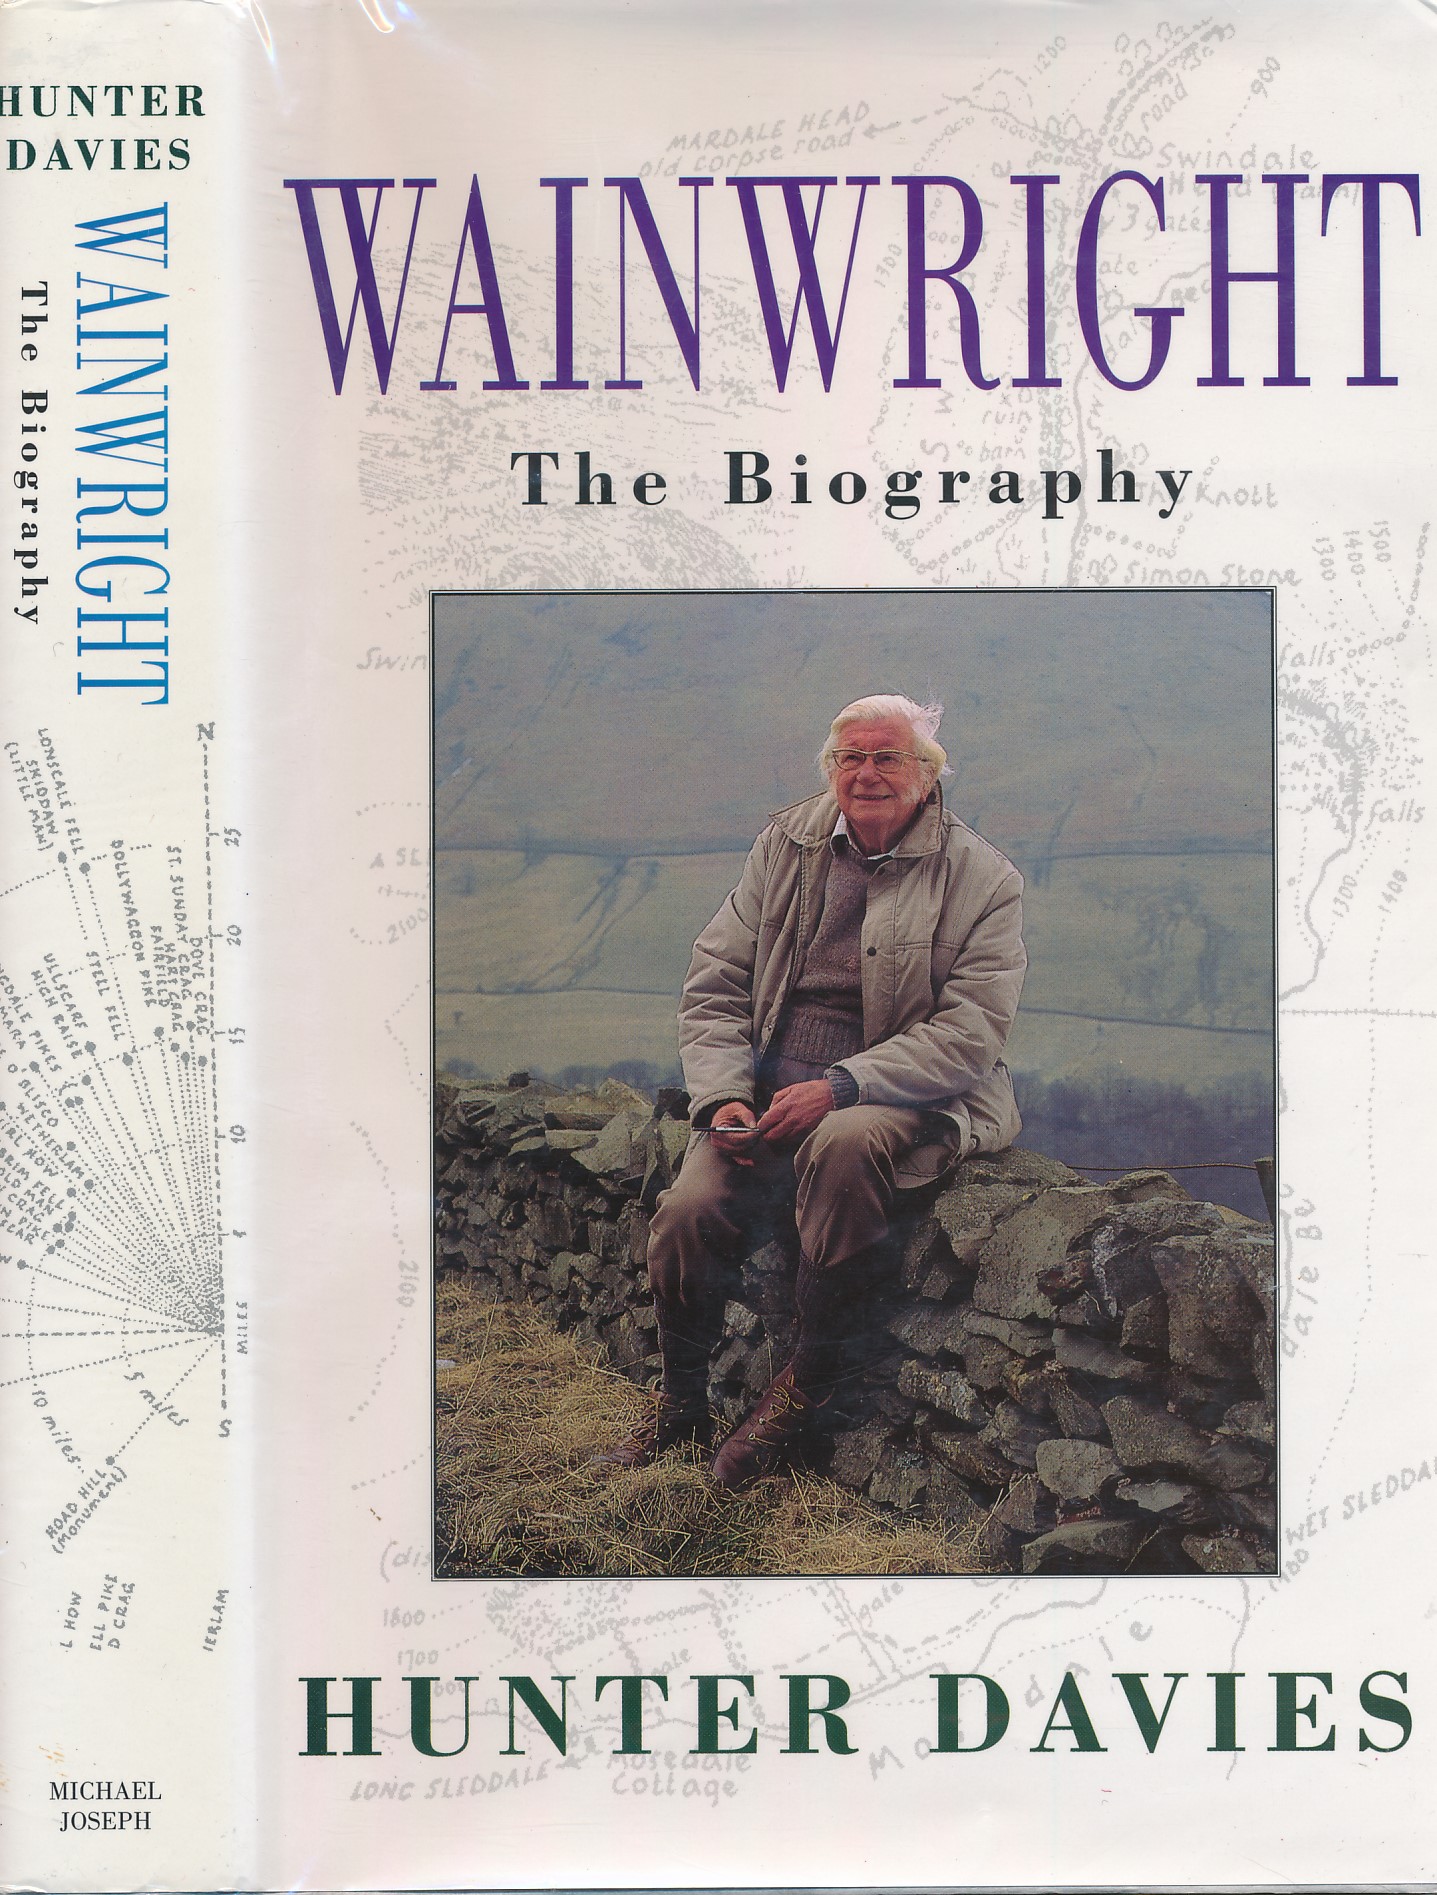 Wainwright The Biography.  Signed copy.